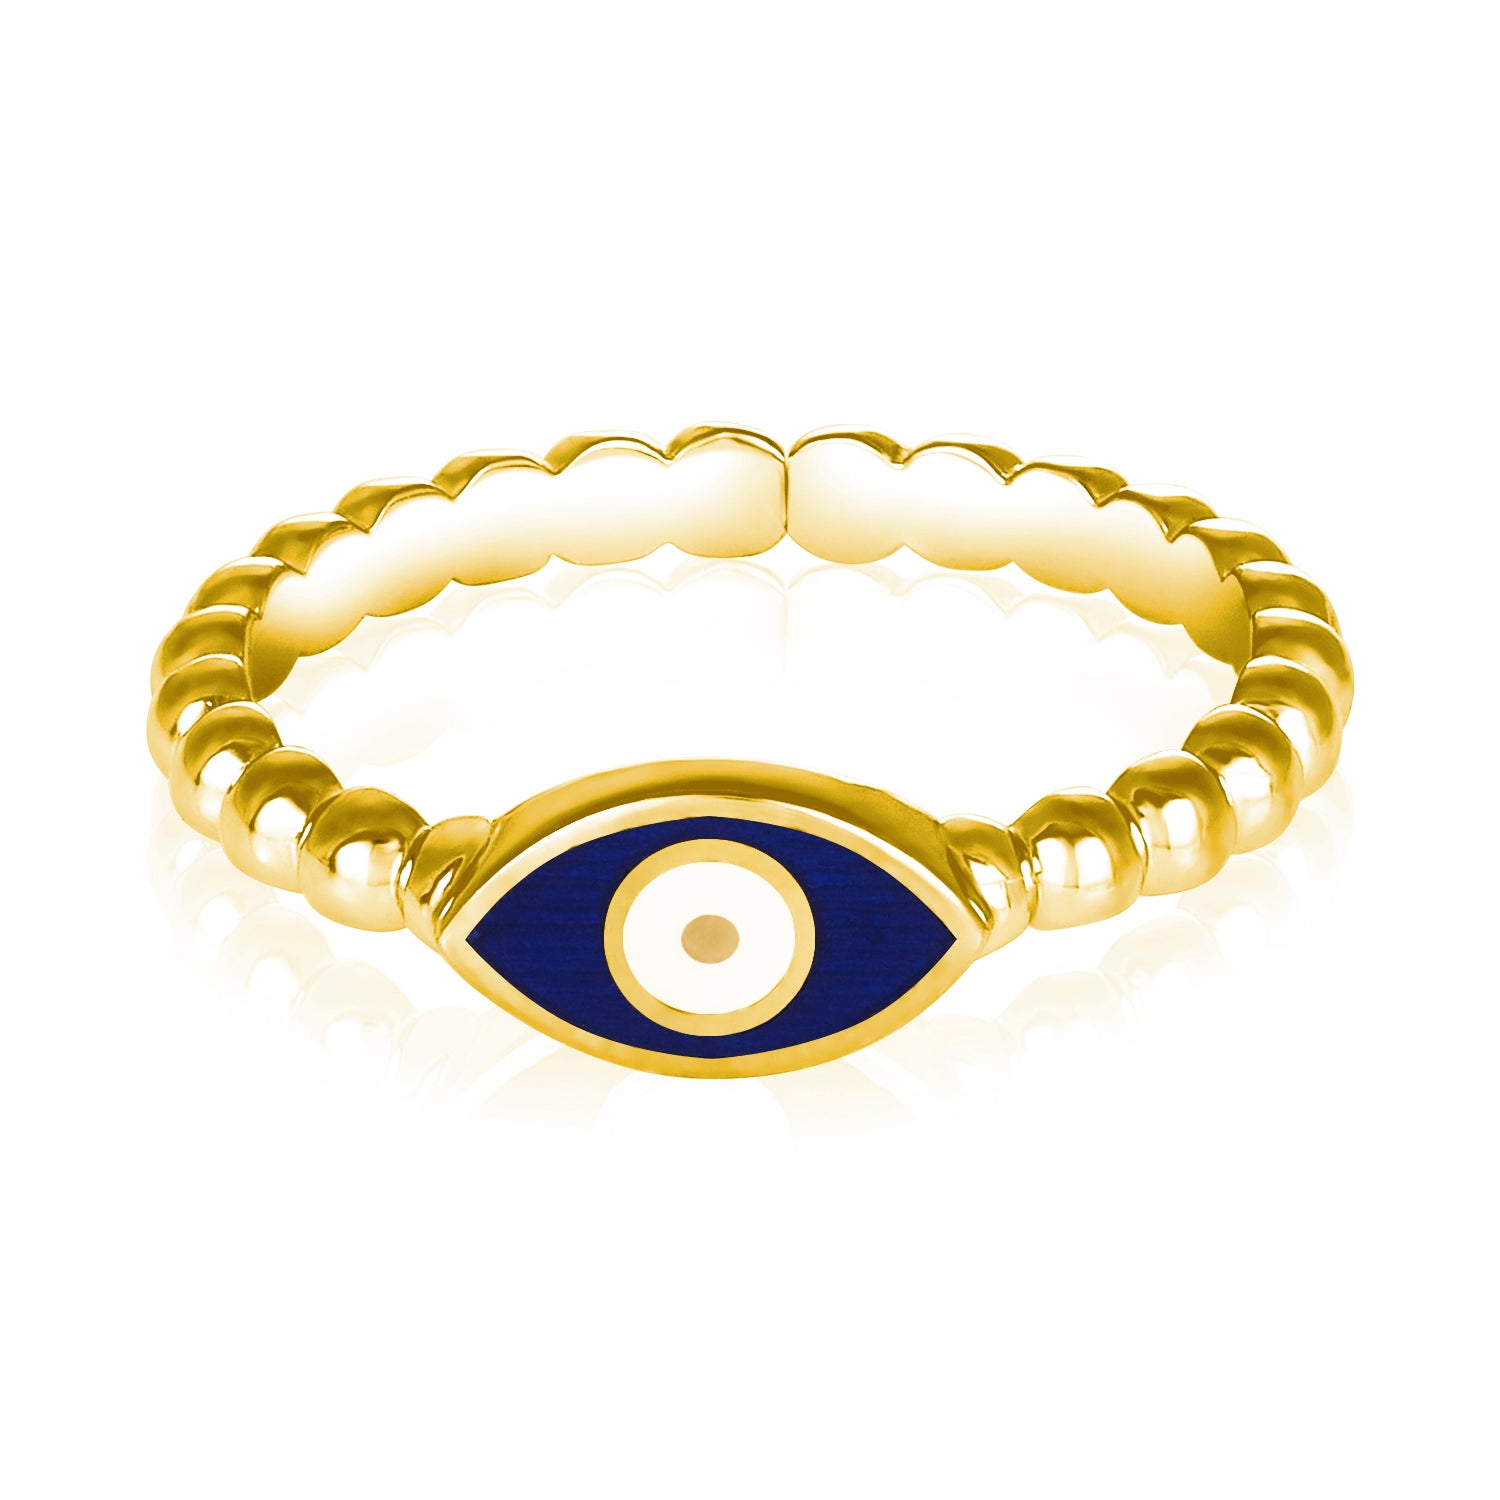 Buy Gold Plated Evil Eye Ring by Outhouse Online at Aza Fashions.